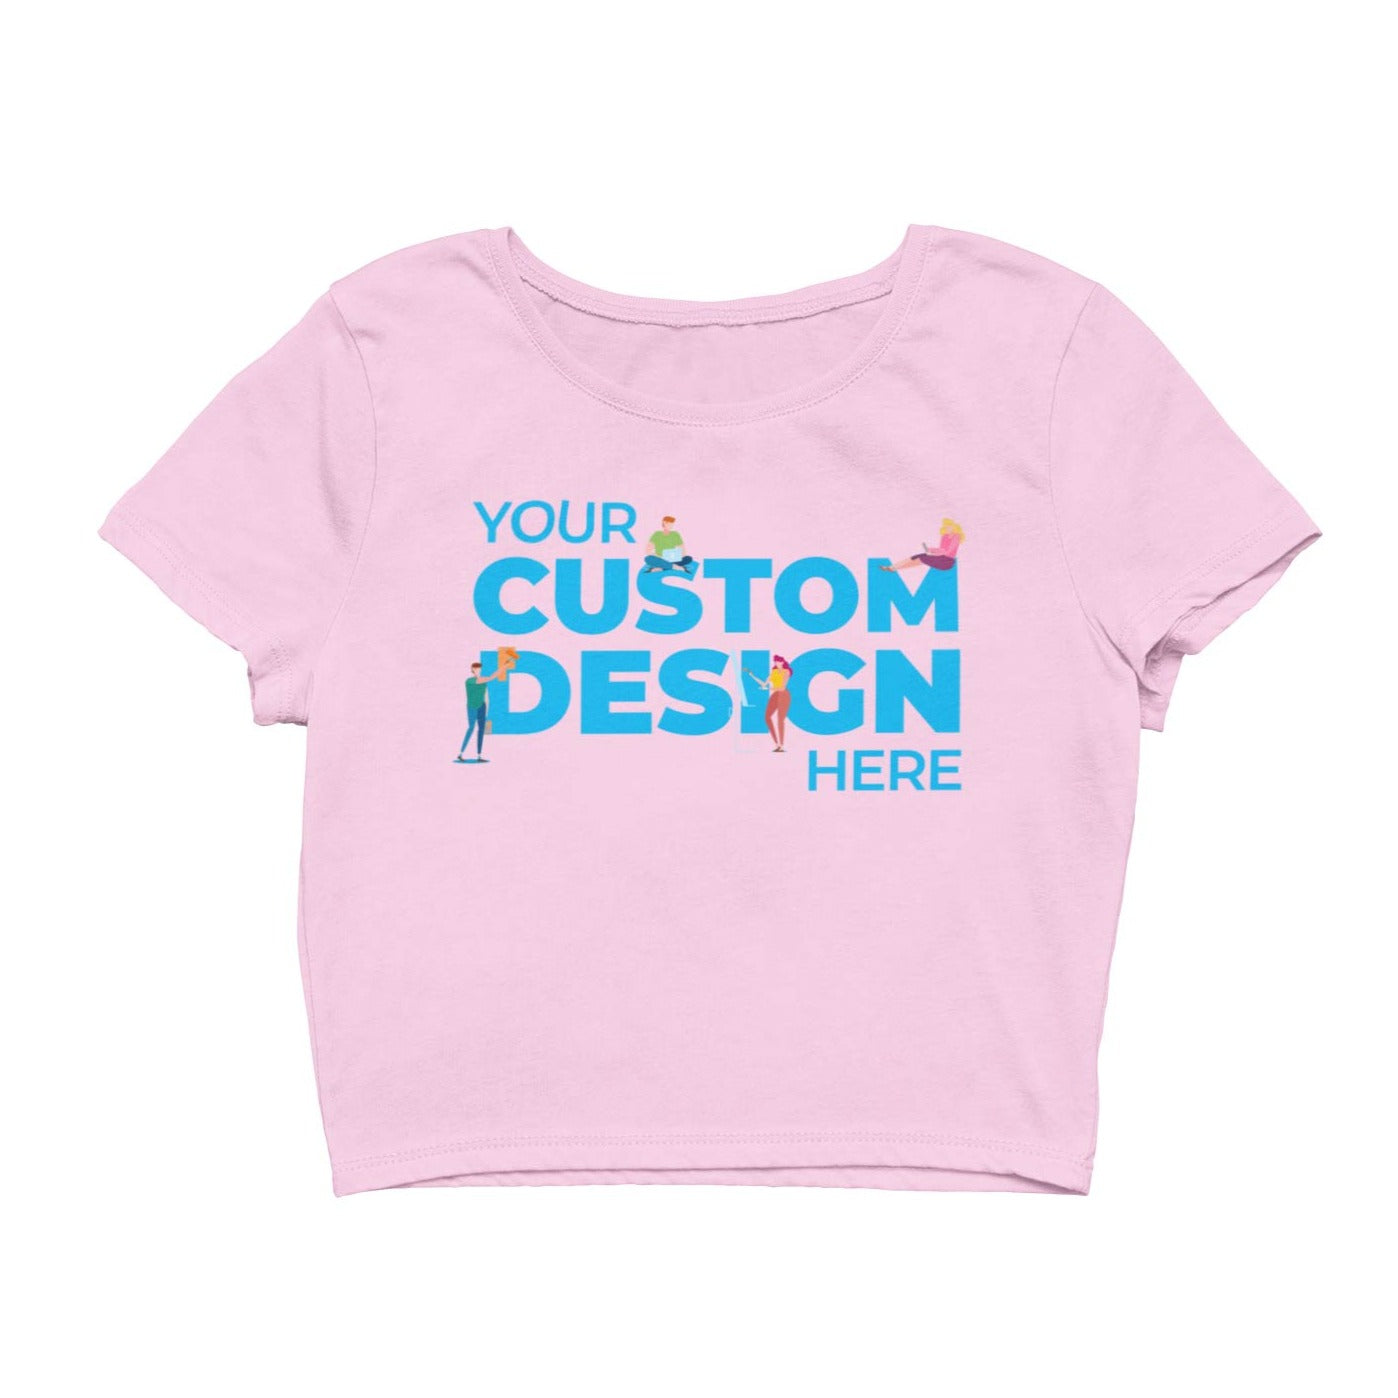 baby pink custom customizable personalized your logo image crop tops by the banyan tee plain black crop top crop tops india crop tops for girls